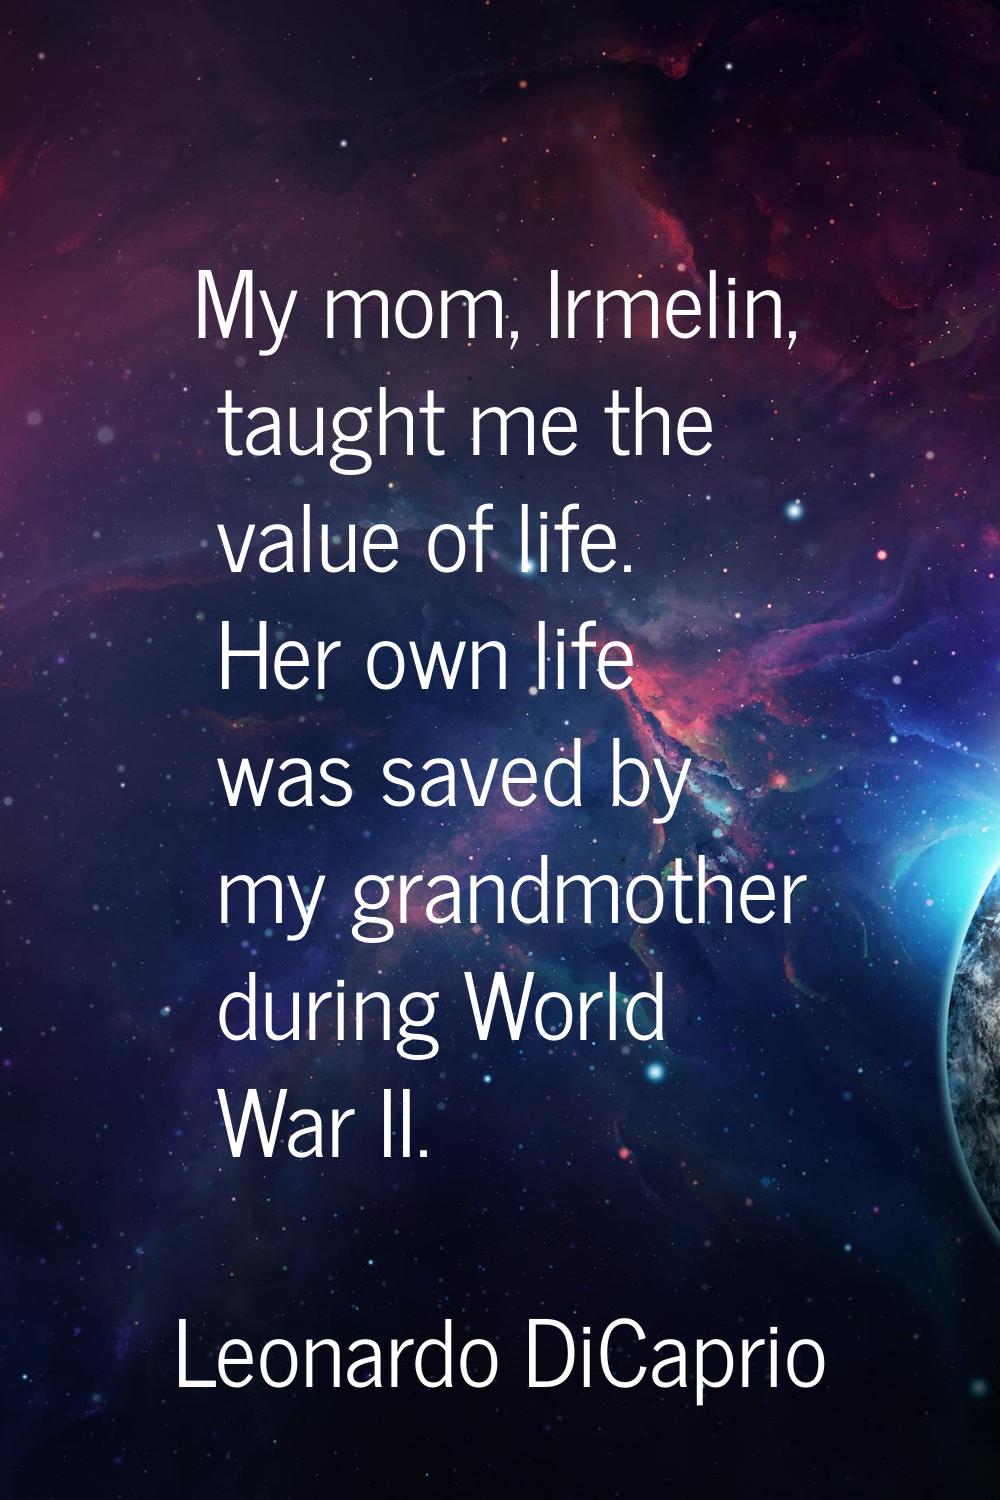 My mom, Irmelin, taught me the value of life. Her own life was saved by my grandmother during World